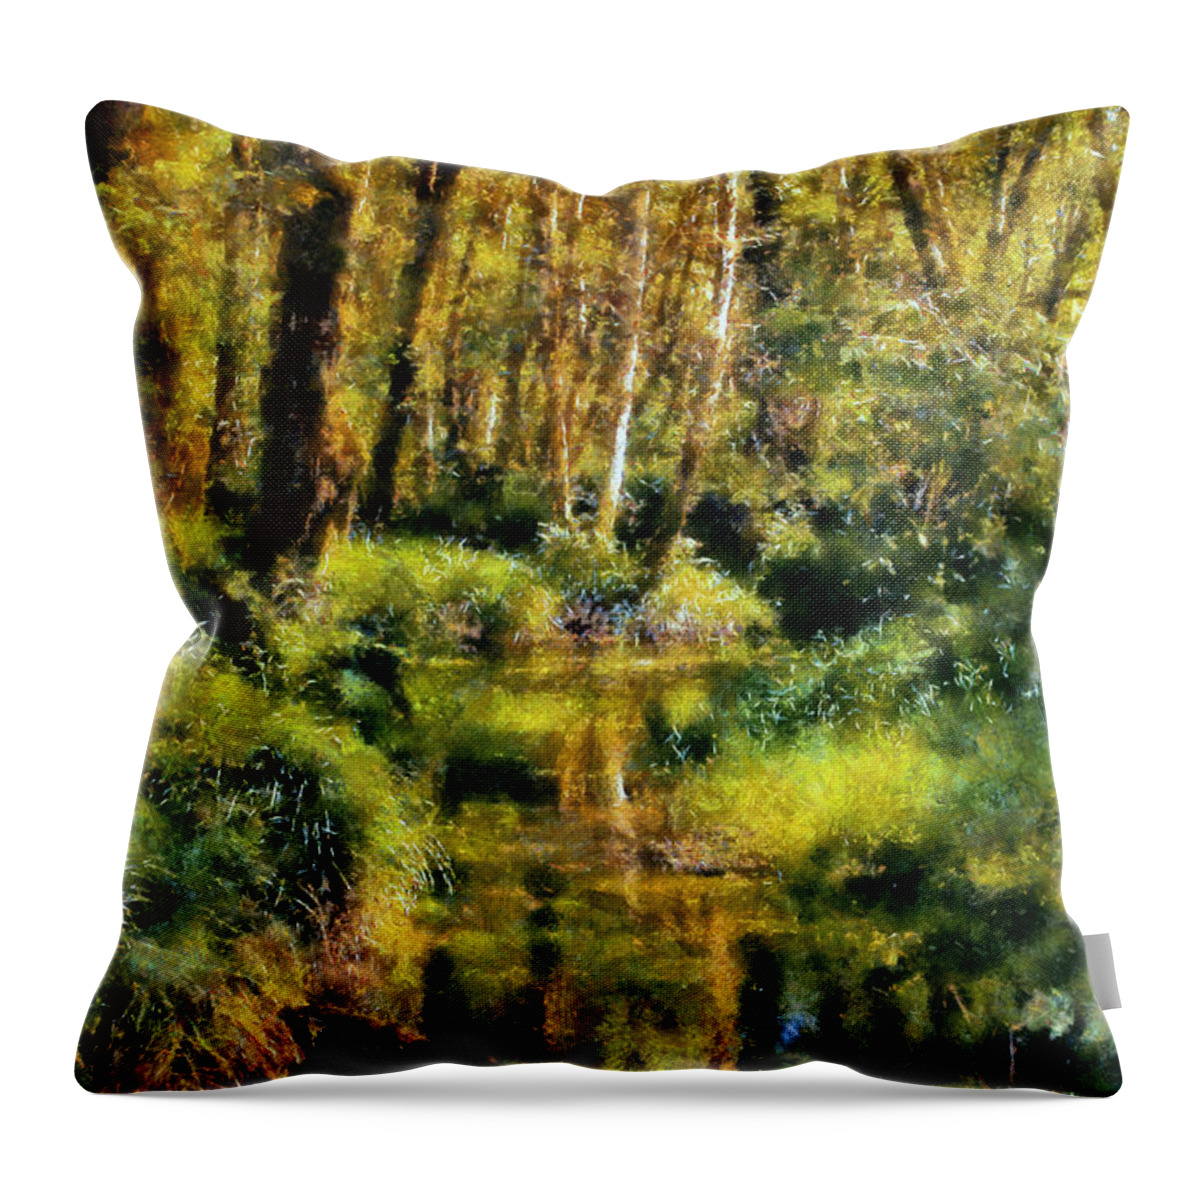 Quinault Rain Forest Throw Pillow featuring the digital art Quinault Rain Forest by Kaylee Mason